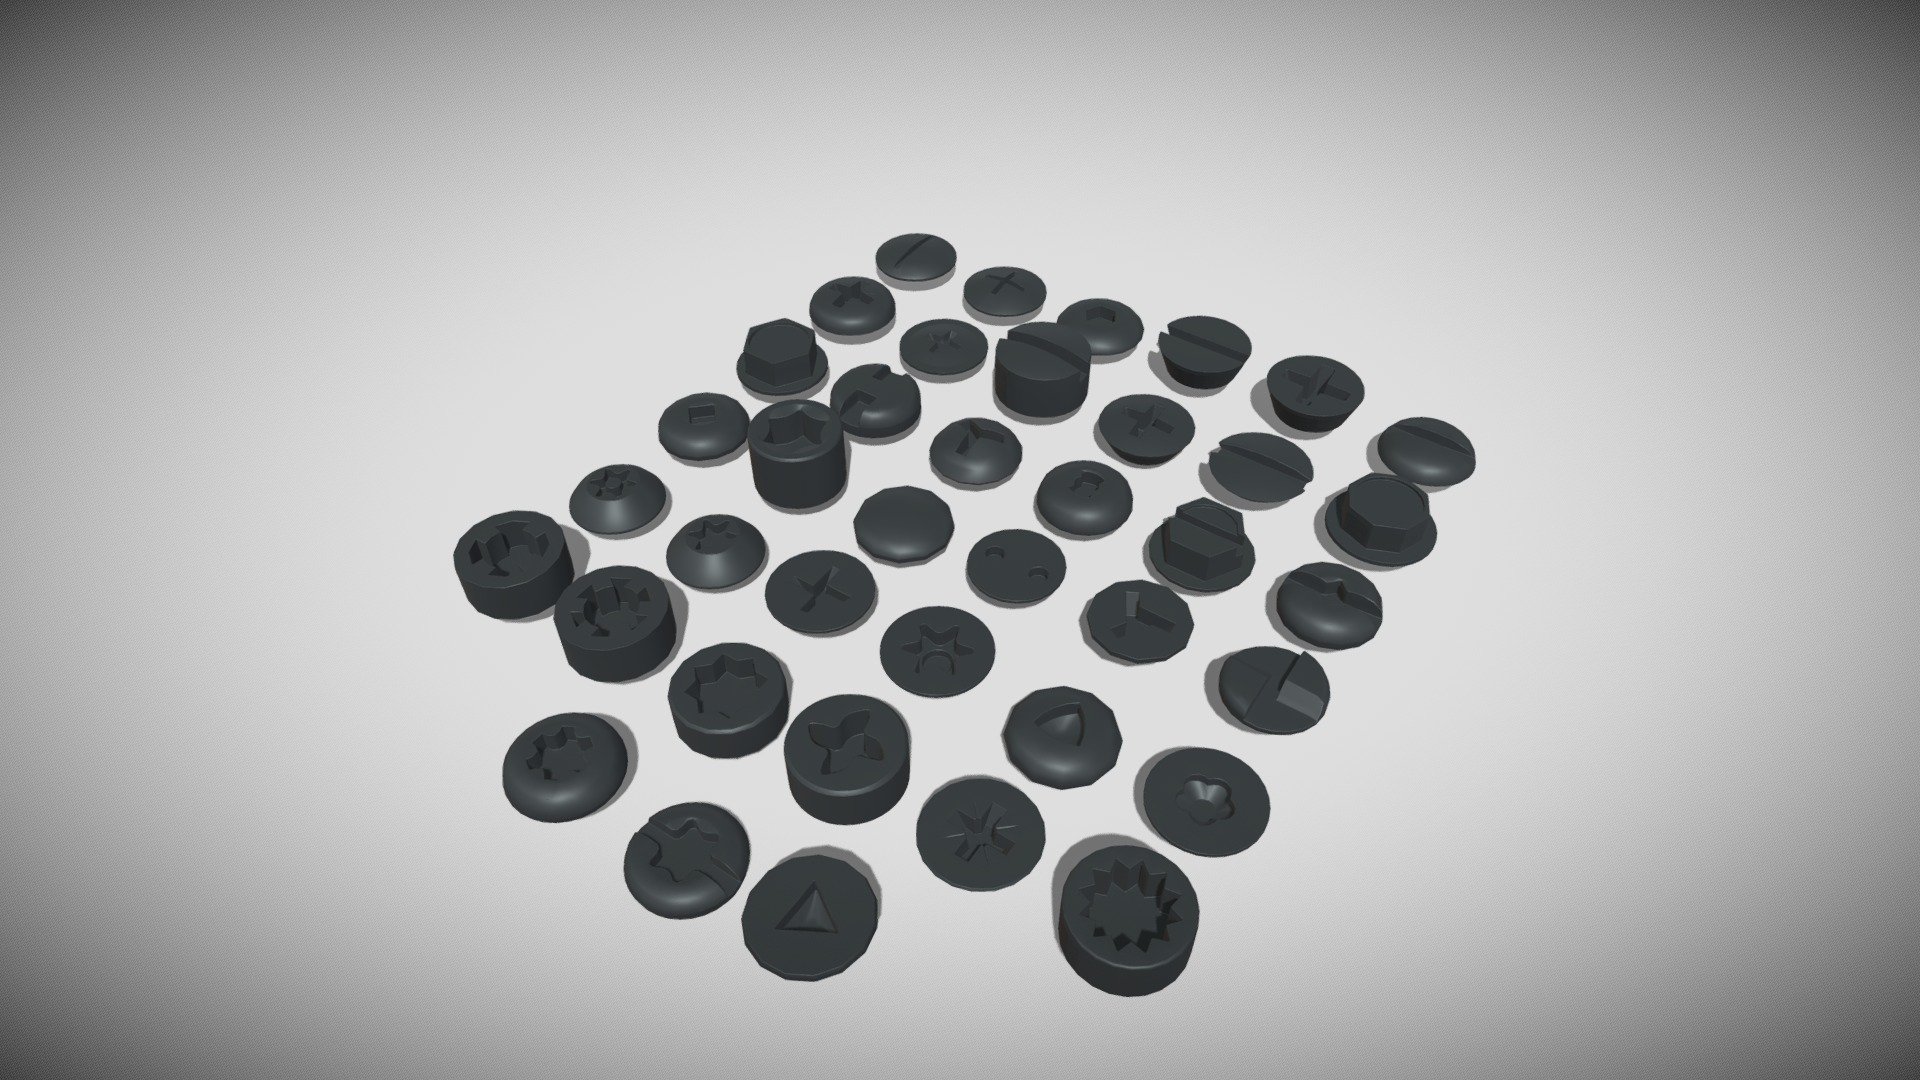 This pack contains 39 detailed models of different types of screw heads, modeled in Cinema 4D.The models were created using approximate real world dimensions.

An additional file has been provided containing the original Cinema 4D project files and other 3d export files such as 3ds, fbx and obj 3d model